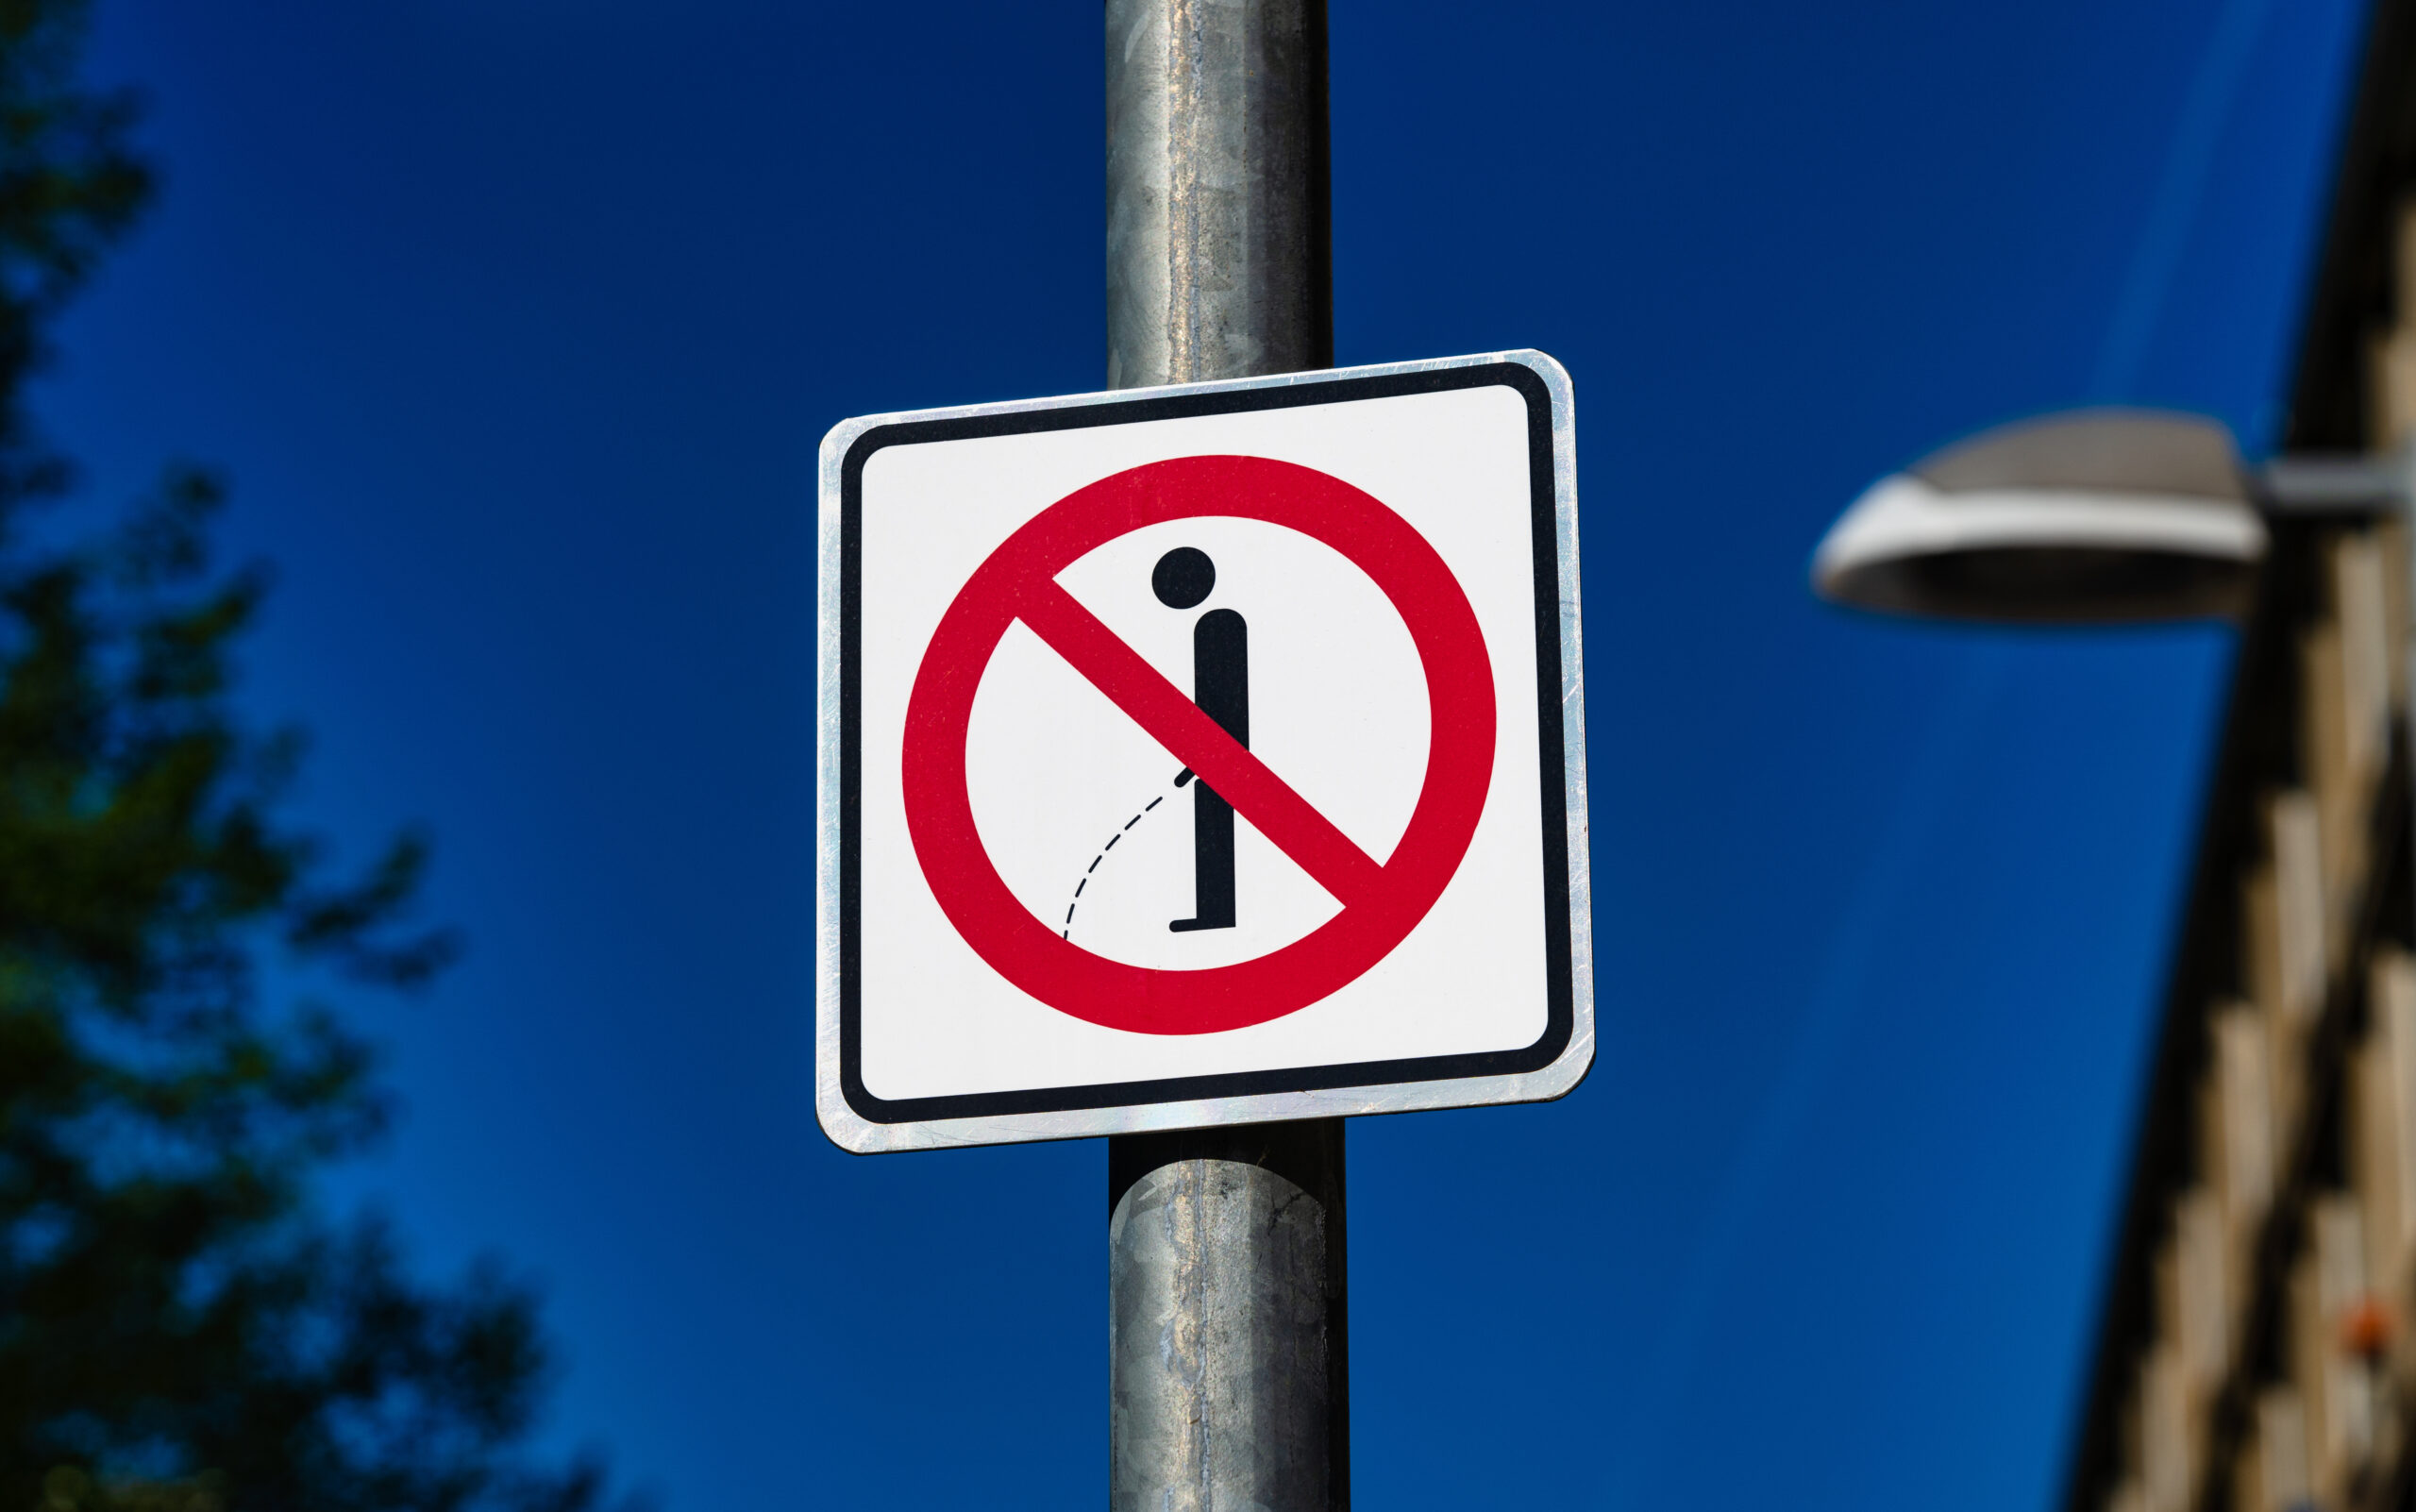 Sign showing a symbol for no urinating